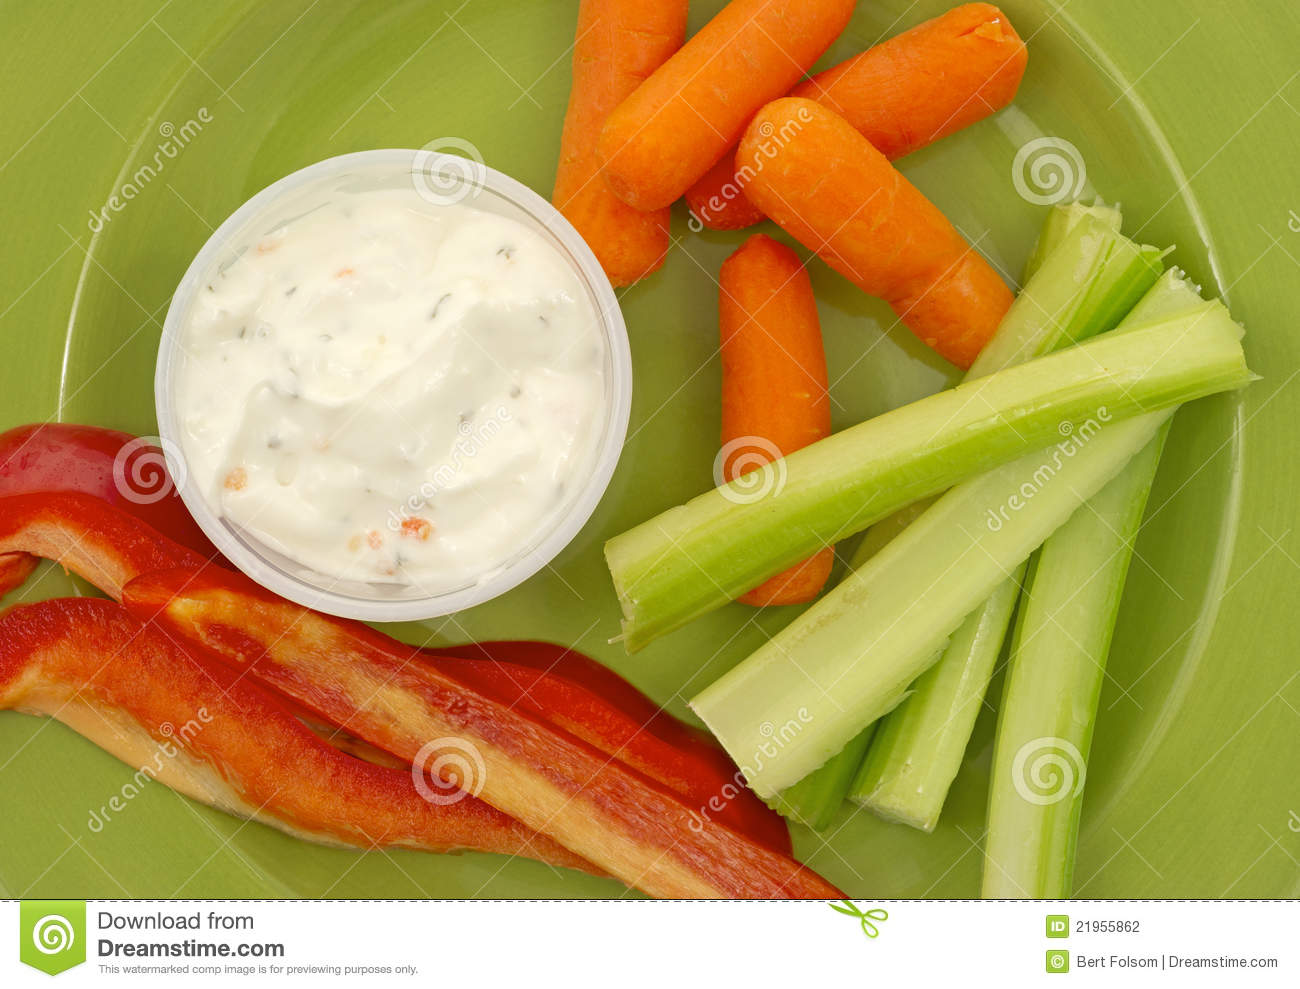     Red Pepper Baby Carrots Celery And Ranch Dressing On A Green Plate